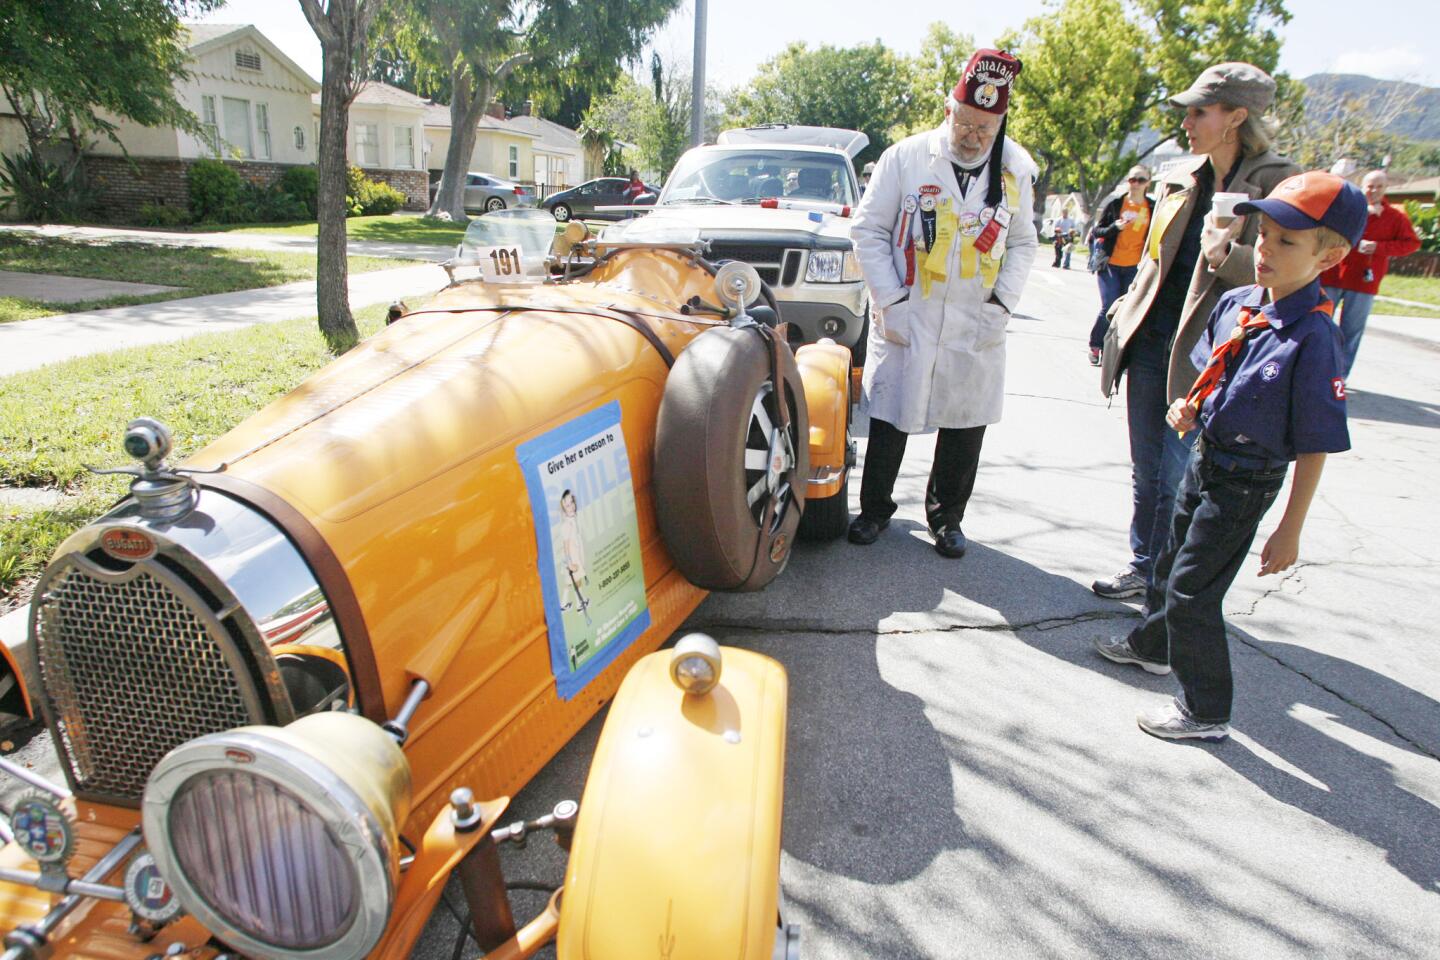 Dr. Bernard Harris, from left, shows off his 1927 Bugati to Gordana Lewis, and her son, Brenton, 7, during Burbank on Parade, which took place on Olive Ave. between Keystone St. and Lomita St. on Saturday, April 14, 2012.